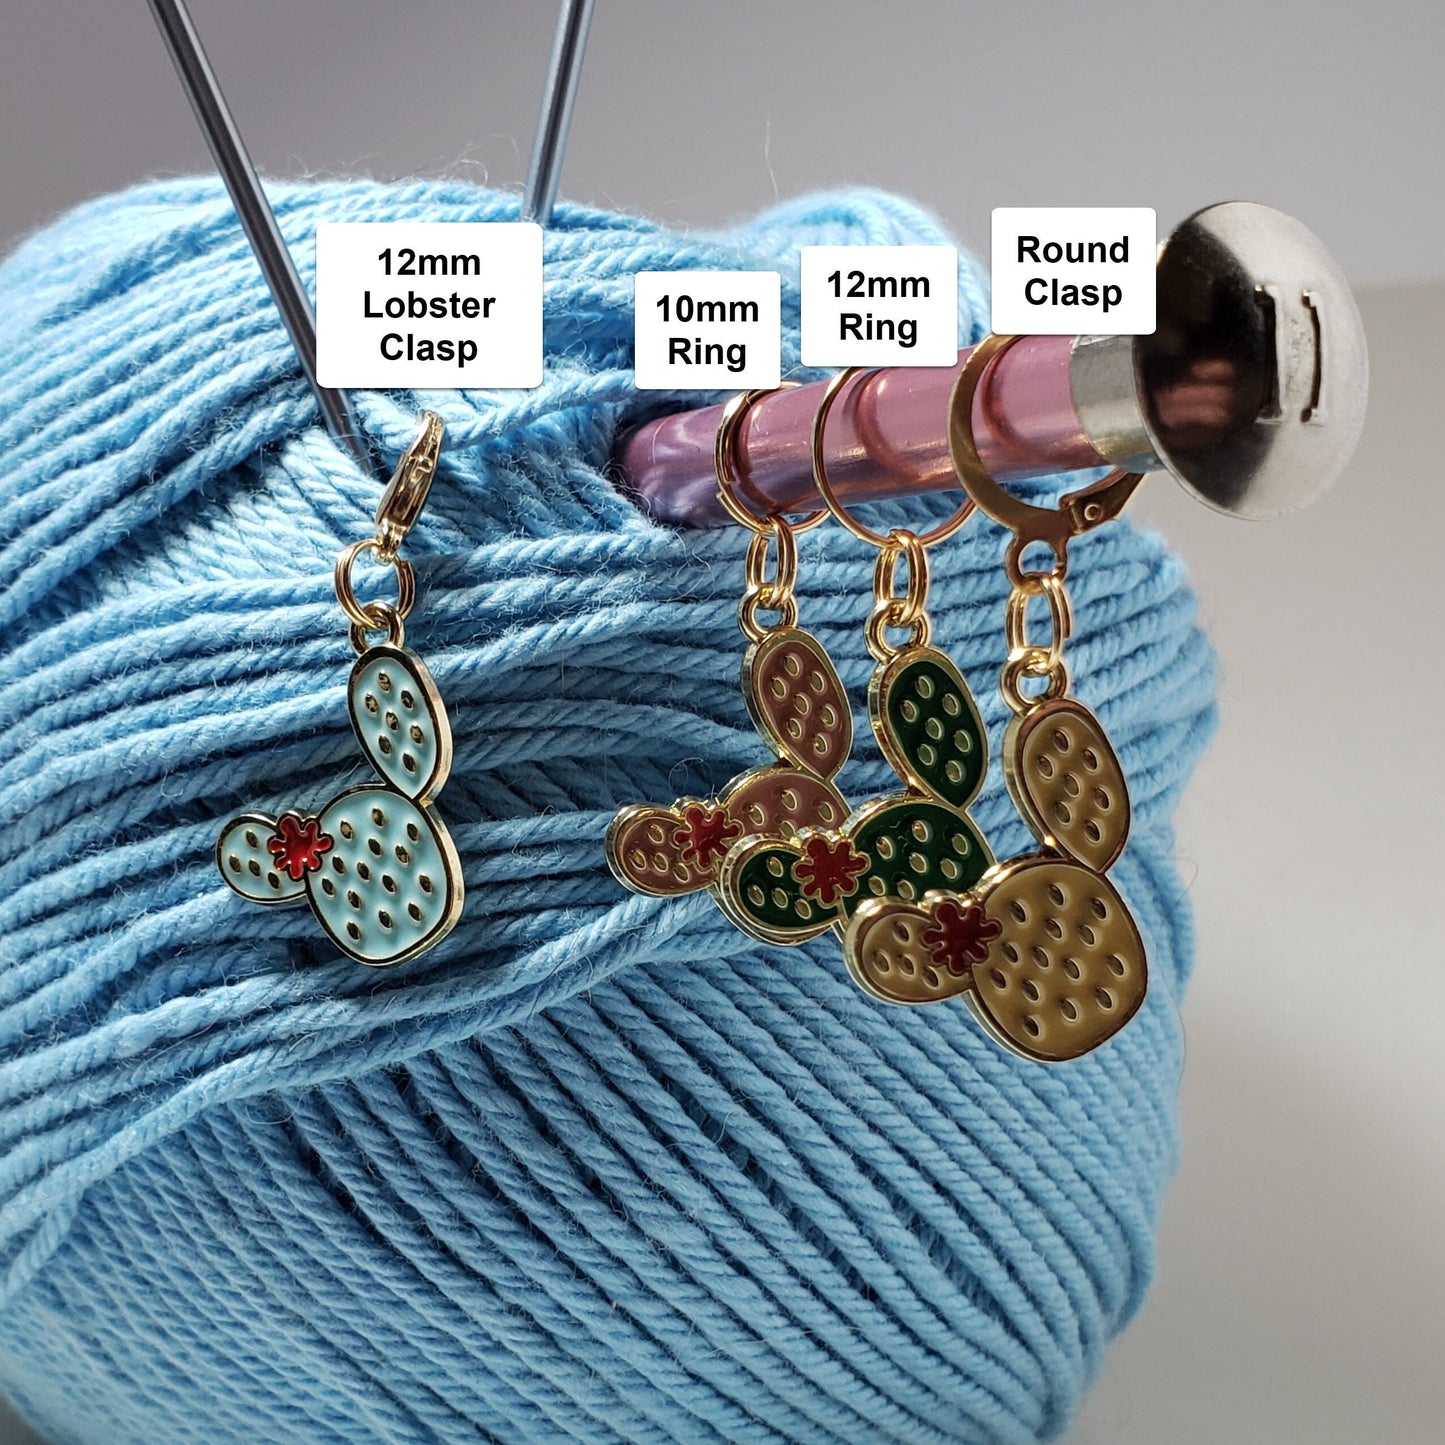 Cactus Stitch Markers for Knitting, 4pc mixed set | Crochet stitch marker, progress keeper, project bag charms, crochet accessories